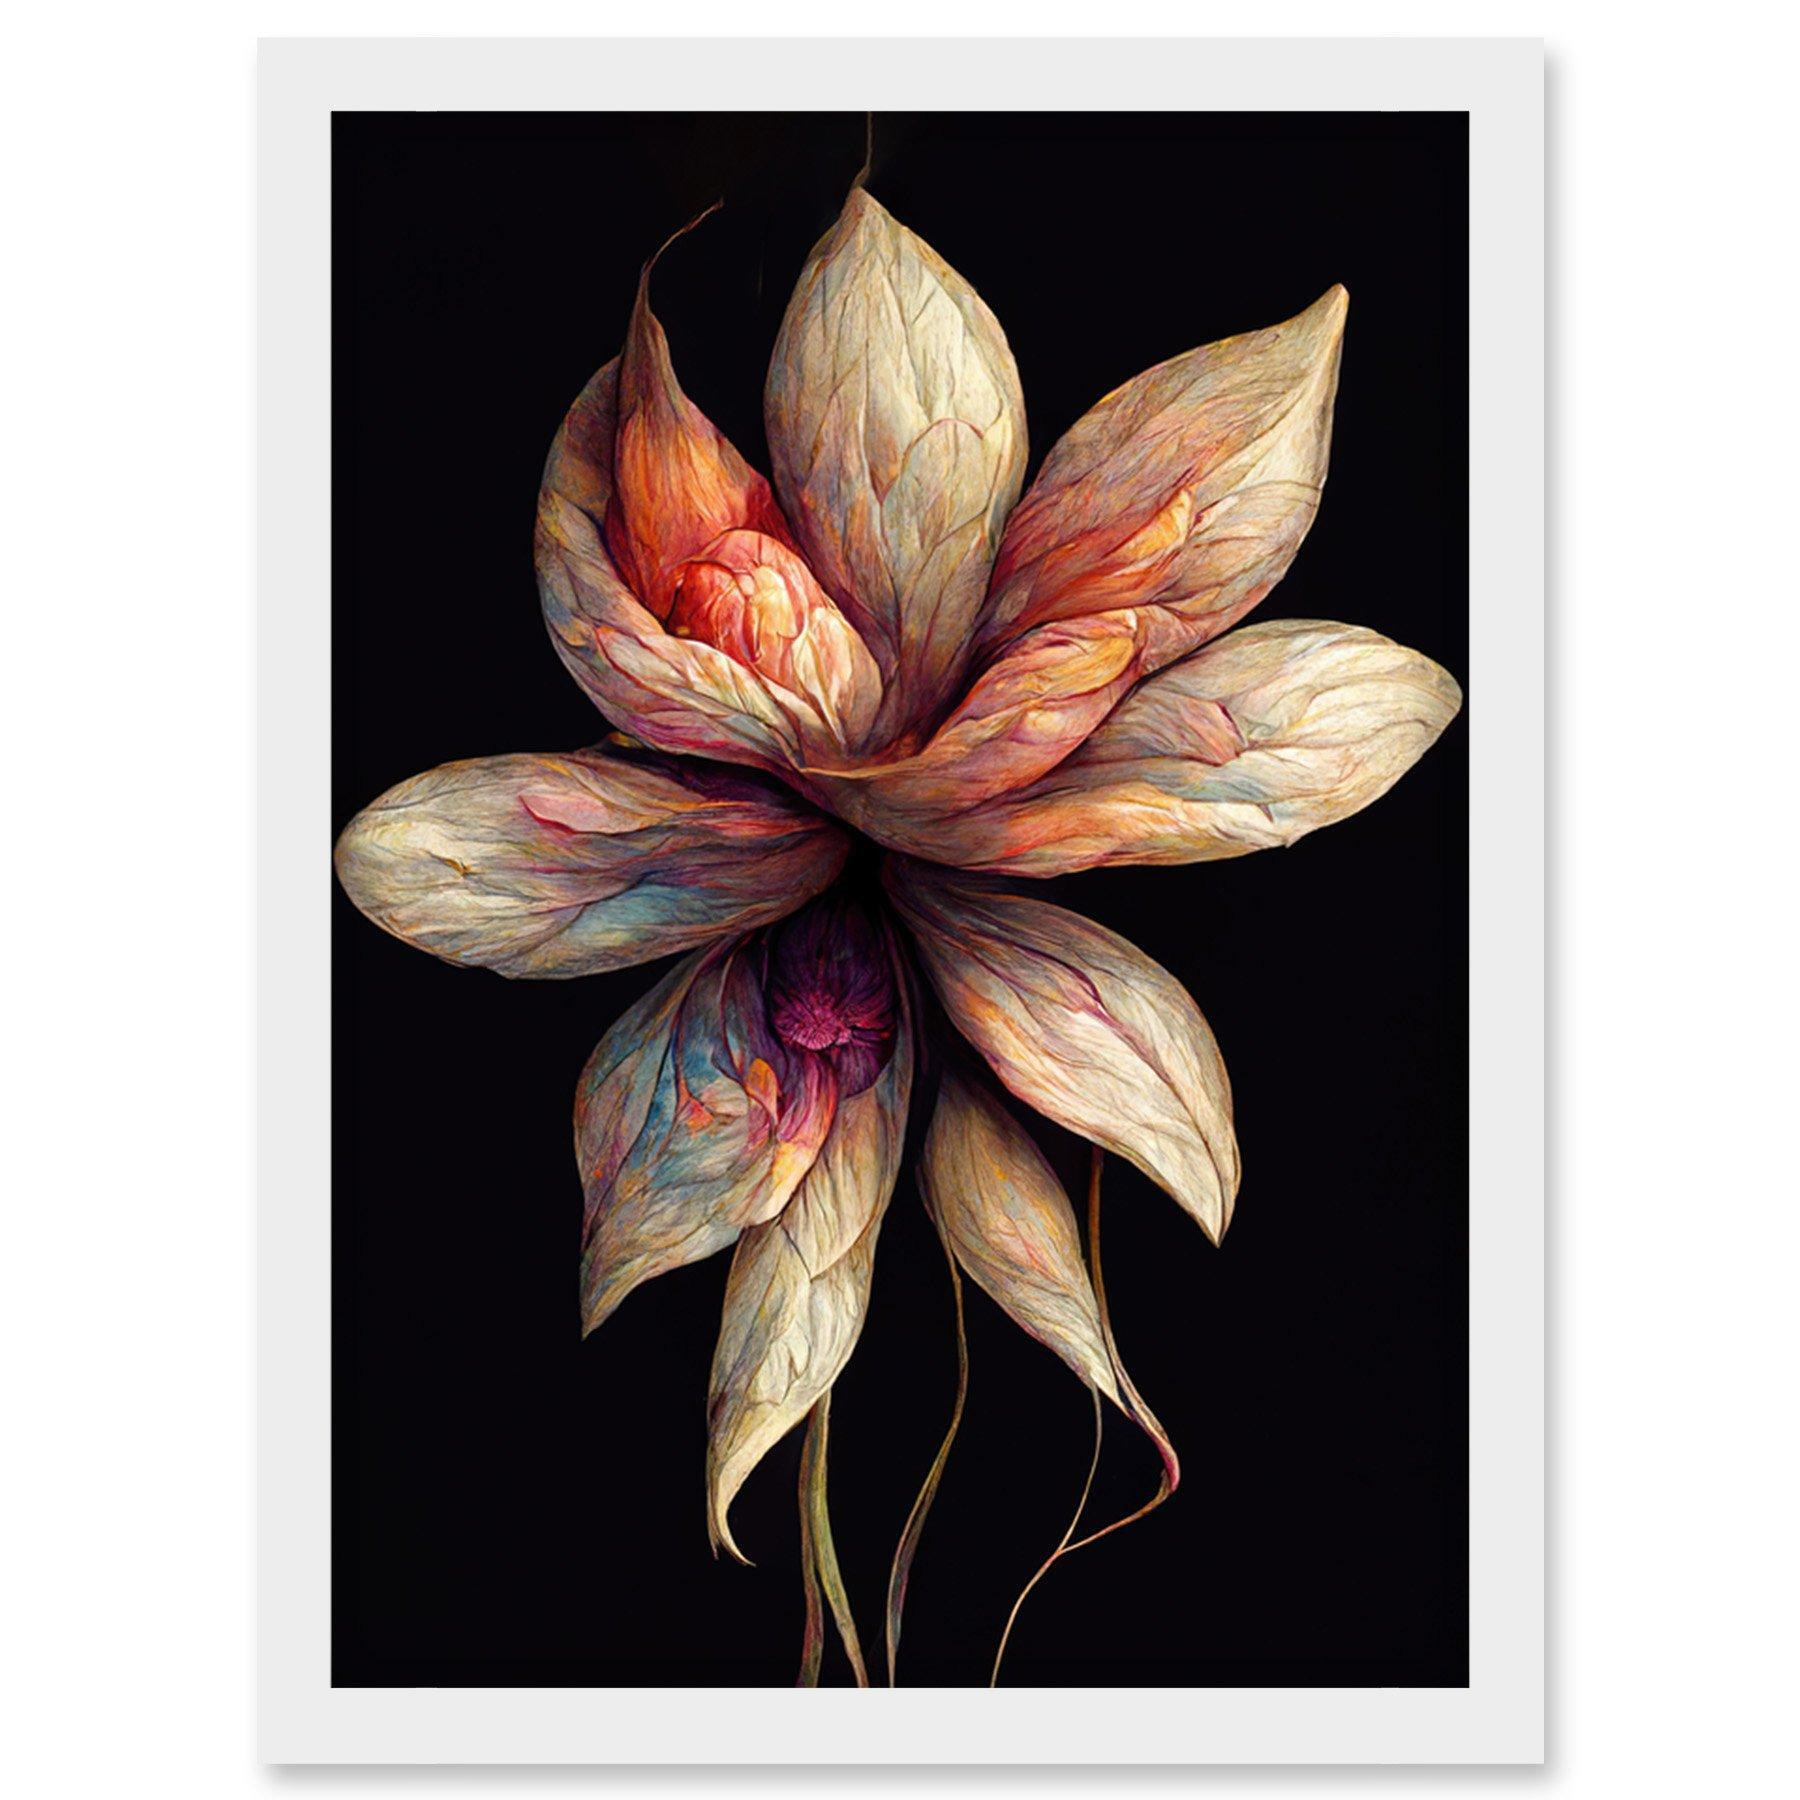 Abstract Flower Display On Dark Background Artwork Framed Wall Art Print A4 - image 1